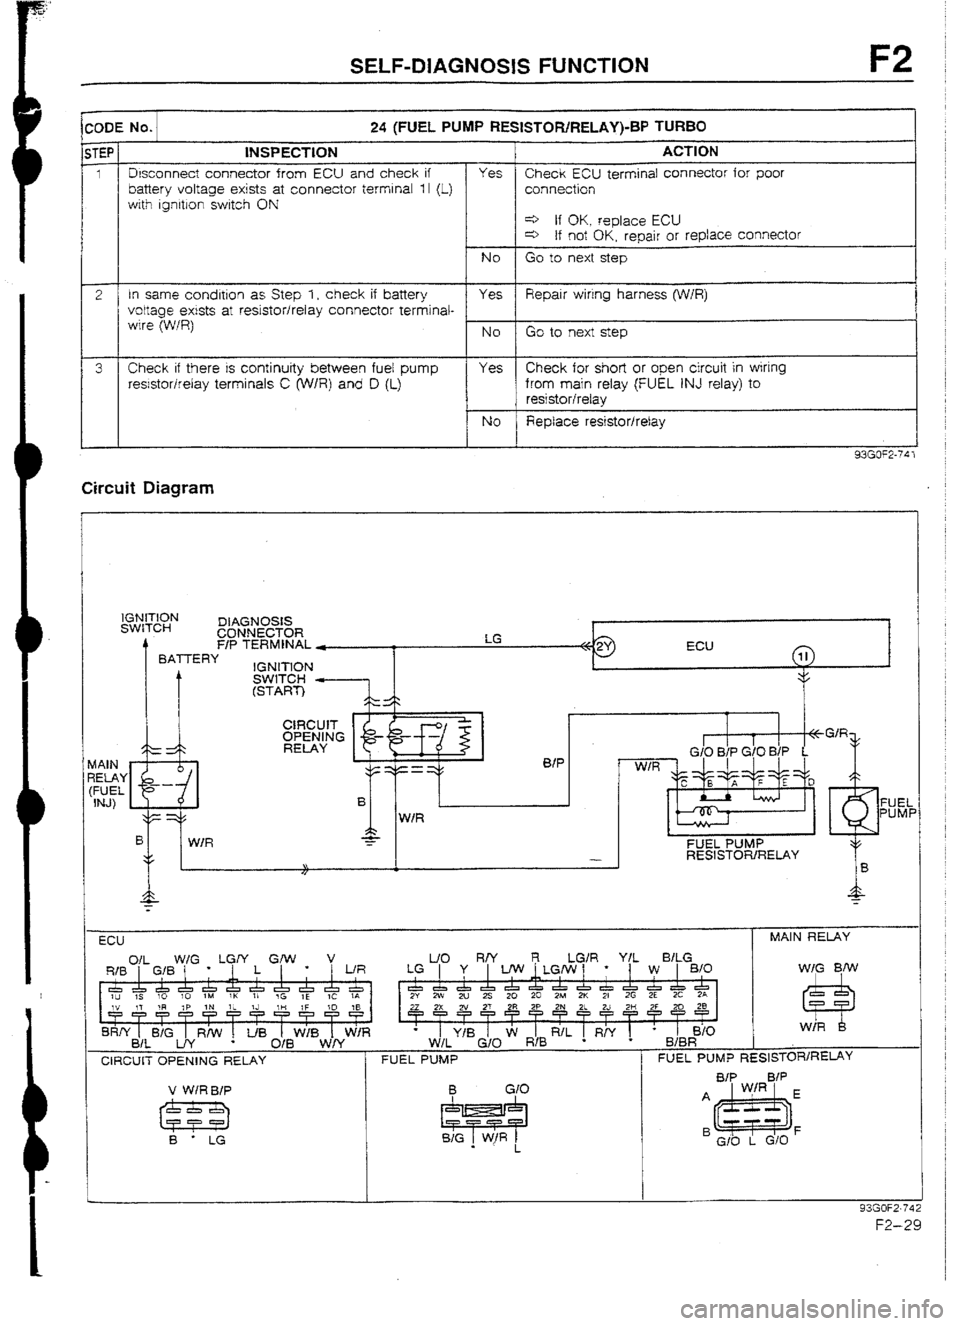 MAZDA 232 1990  Workshop Manual Suplement SELF-DIAGNOSIS FUNCTION F2 
:UDE No. 24 (FUEL PUMP RESISTOR/RELAY)-BP TURBO 
STEP INSPECTION ACTtON 
1 1 Disconnect connector from ECU and check if 
1 battery voltage exists at connector terminal 1 I 